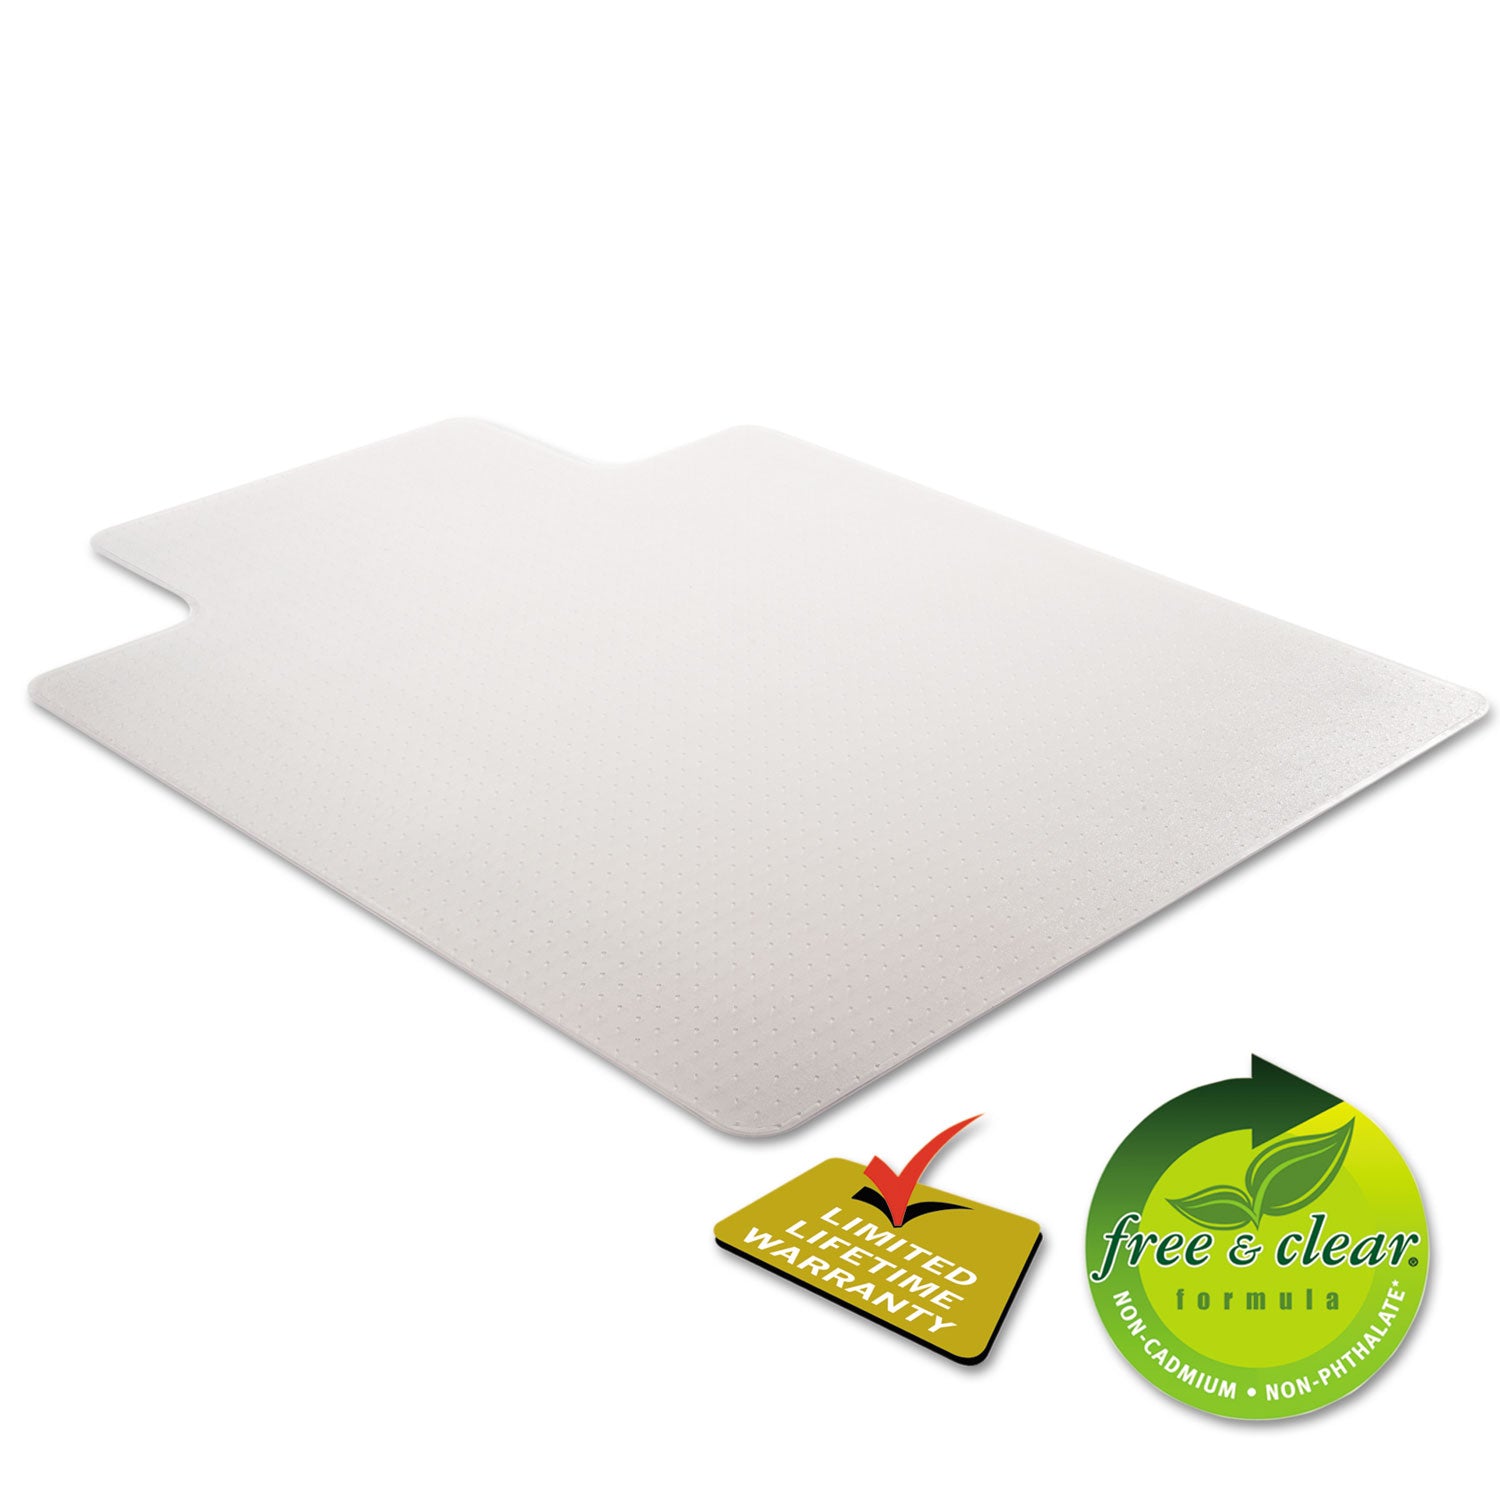 SuperMat Frequent Use Chair Mat for Medium Pile Carpet, 45 x 53, Wide Lipped, Clear - 